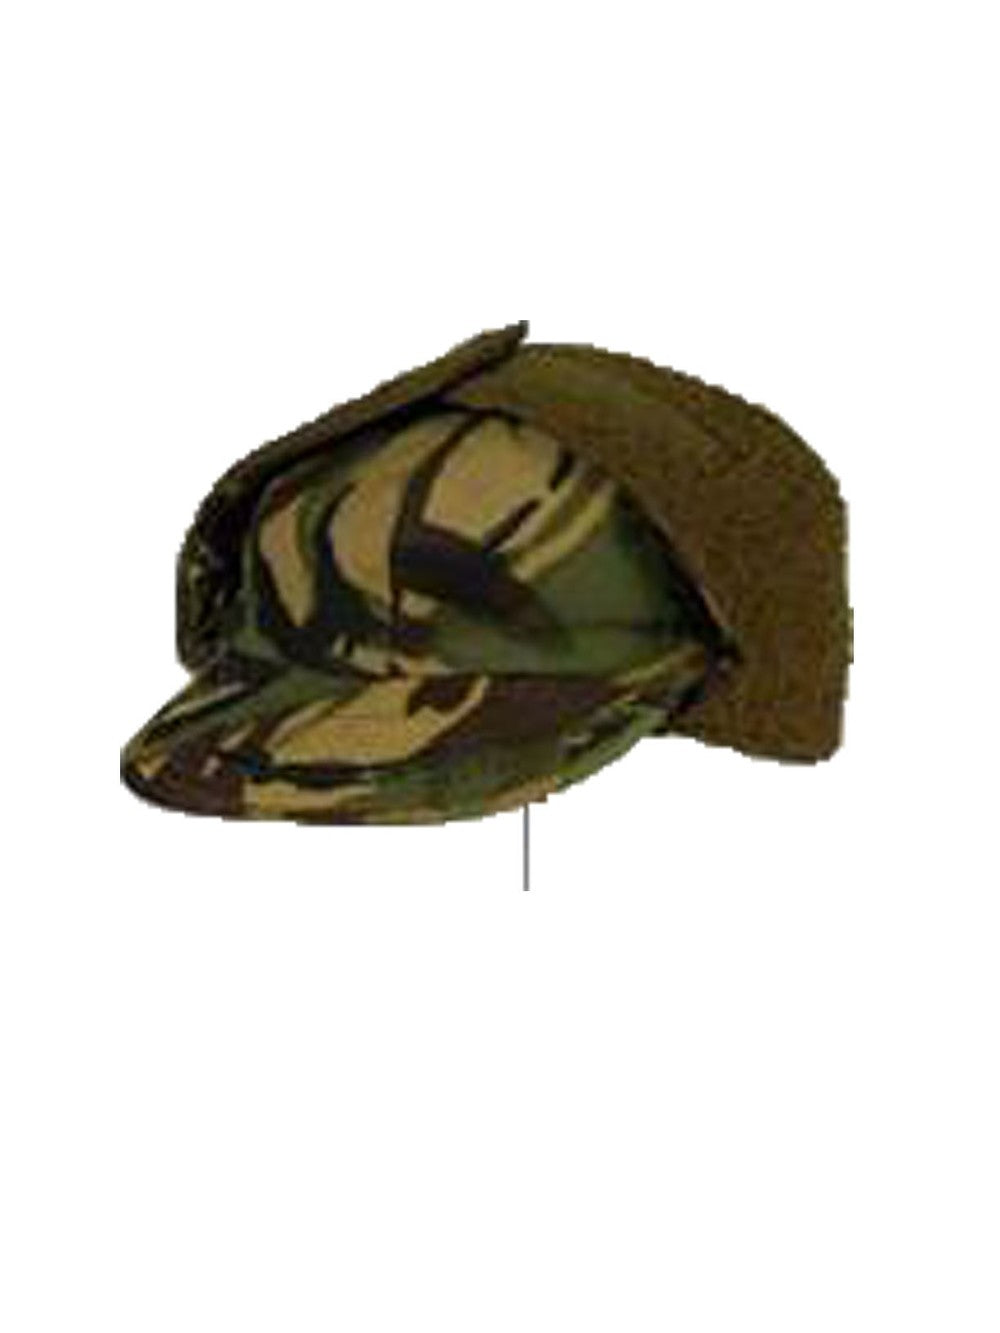 British Army Extreme Cold Weather artctic Winter Hats